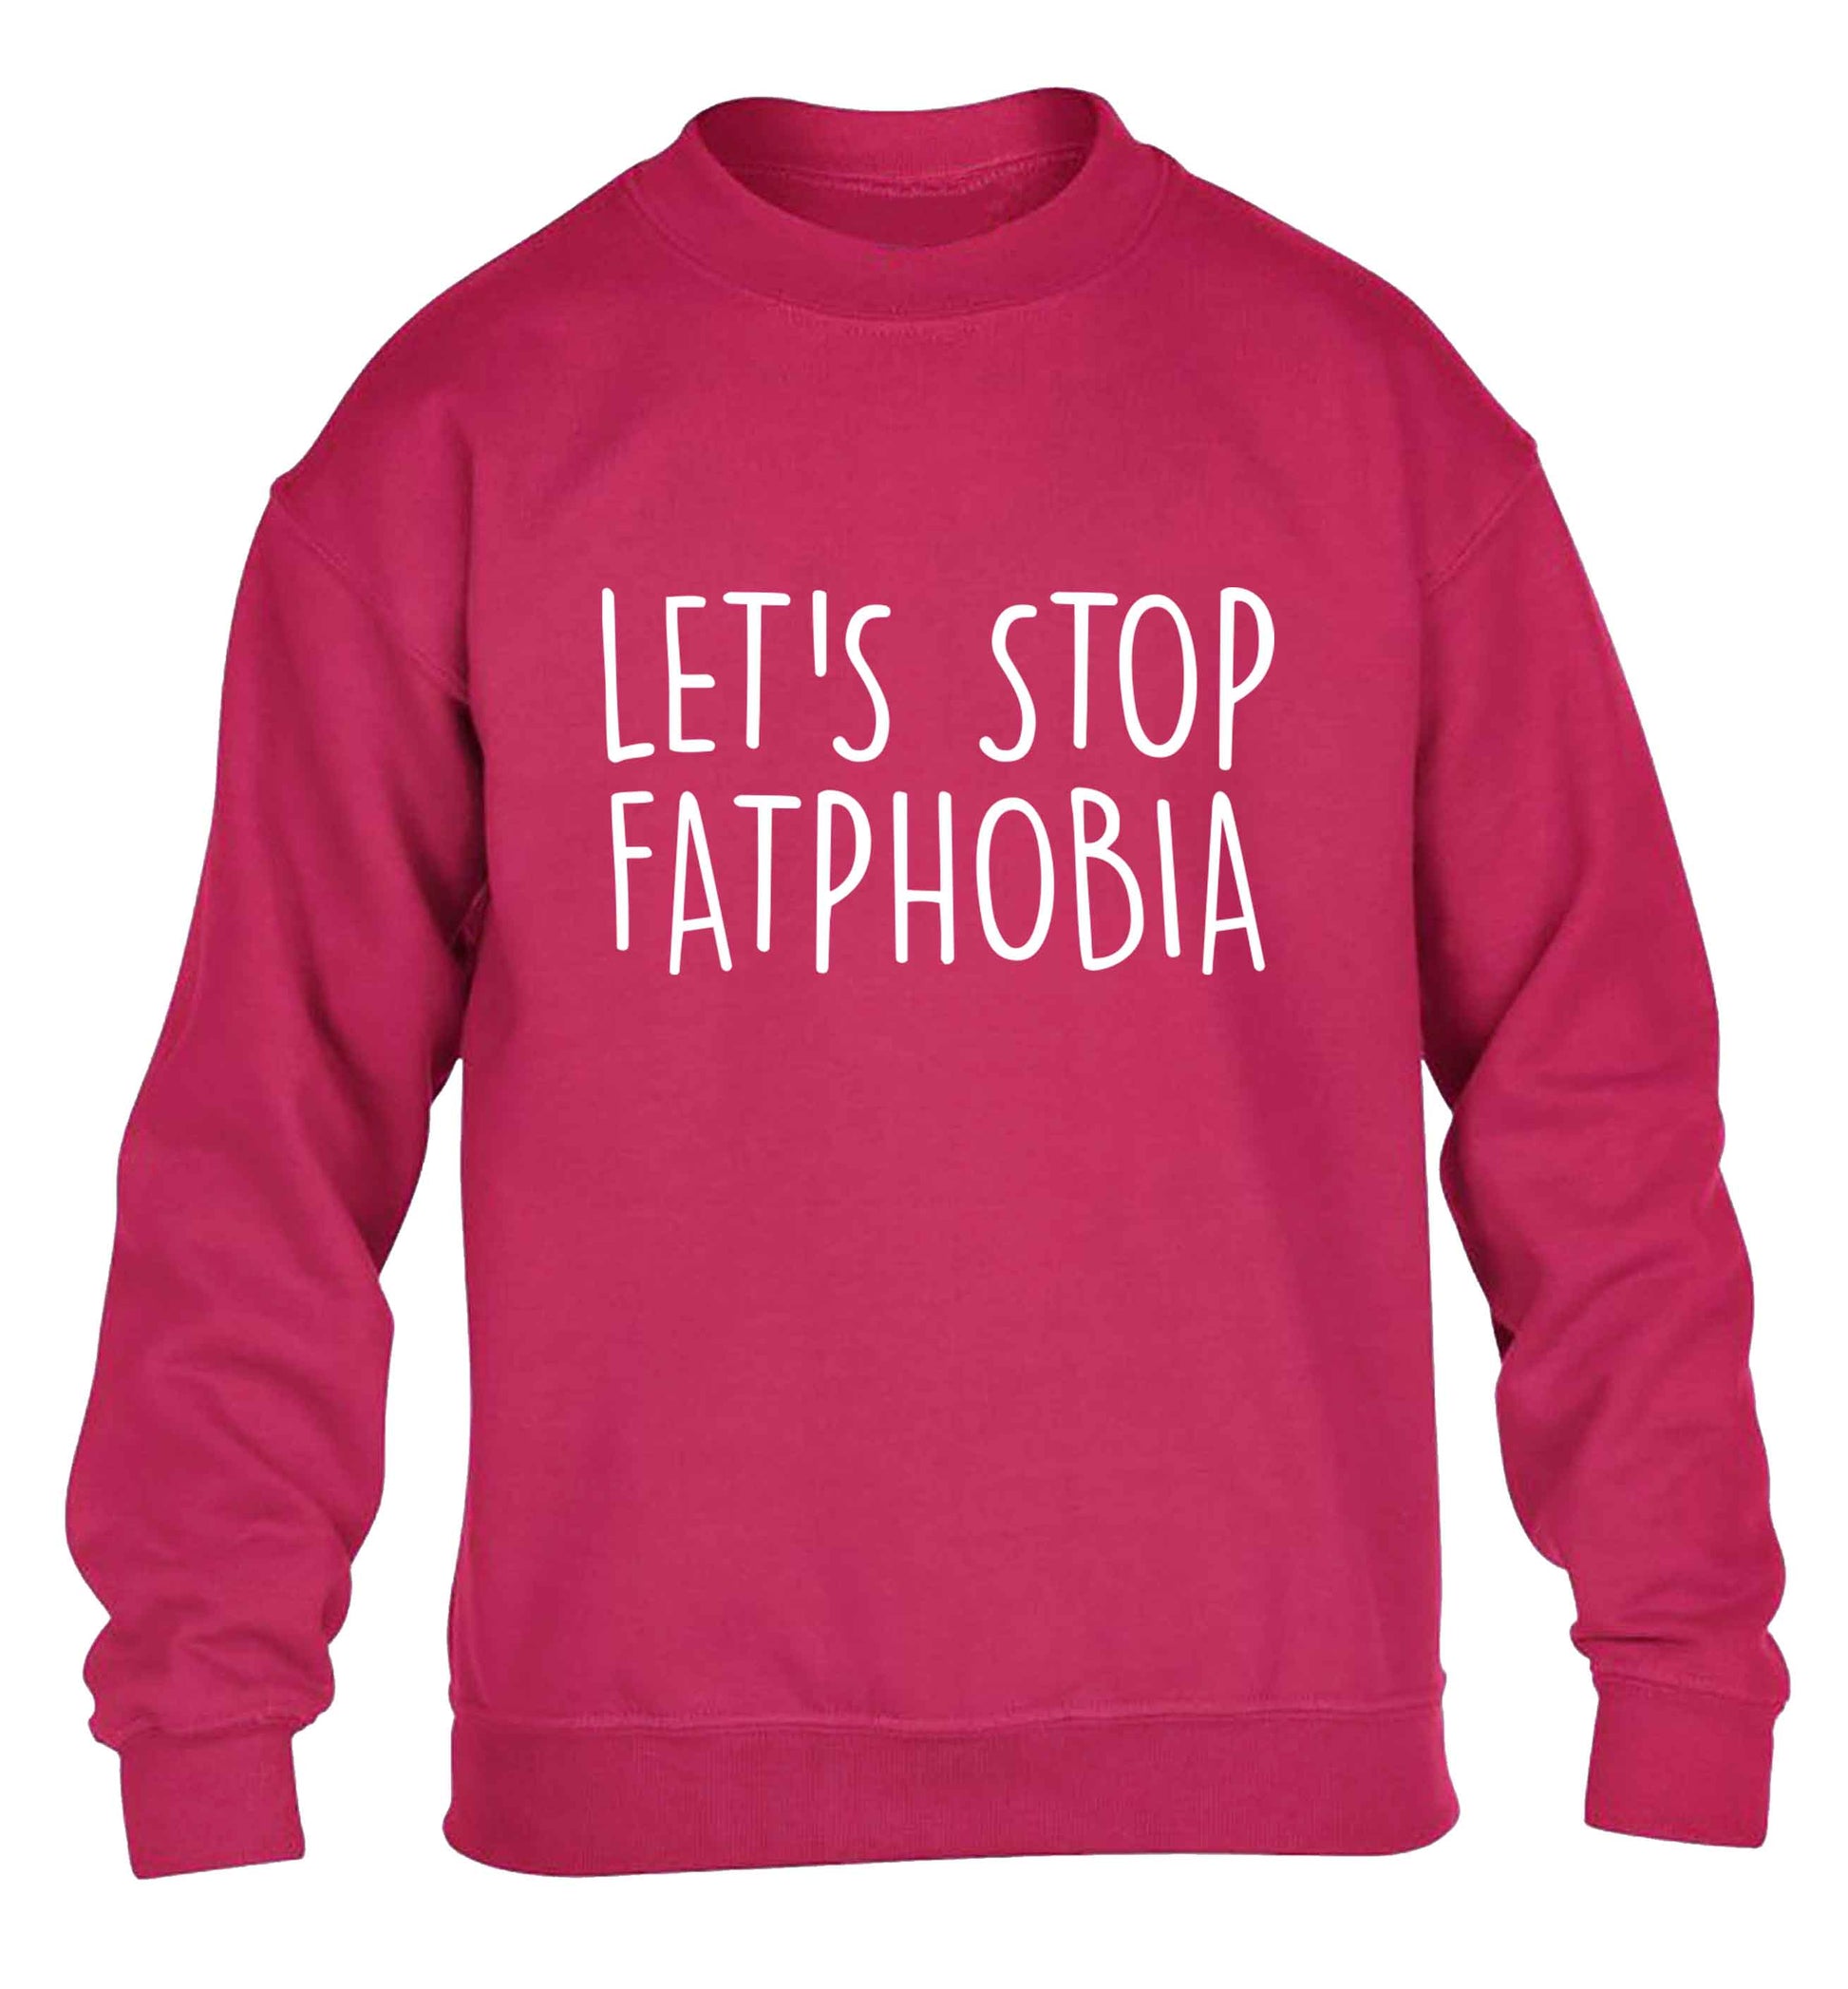 Let's stop fatphobia children's pink sweater 12-13 Years